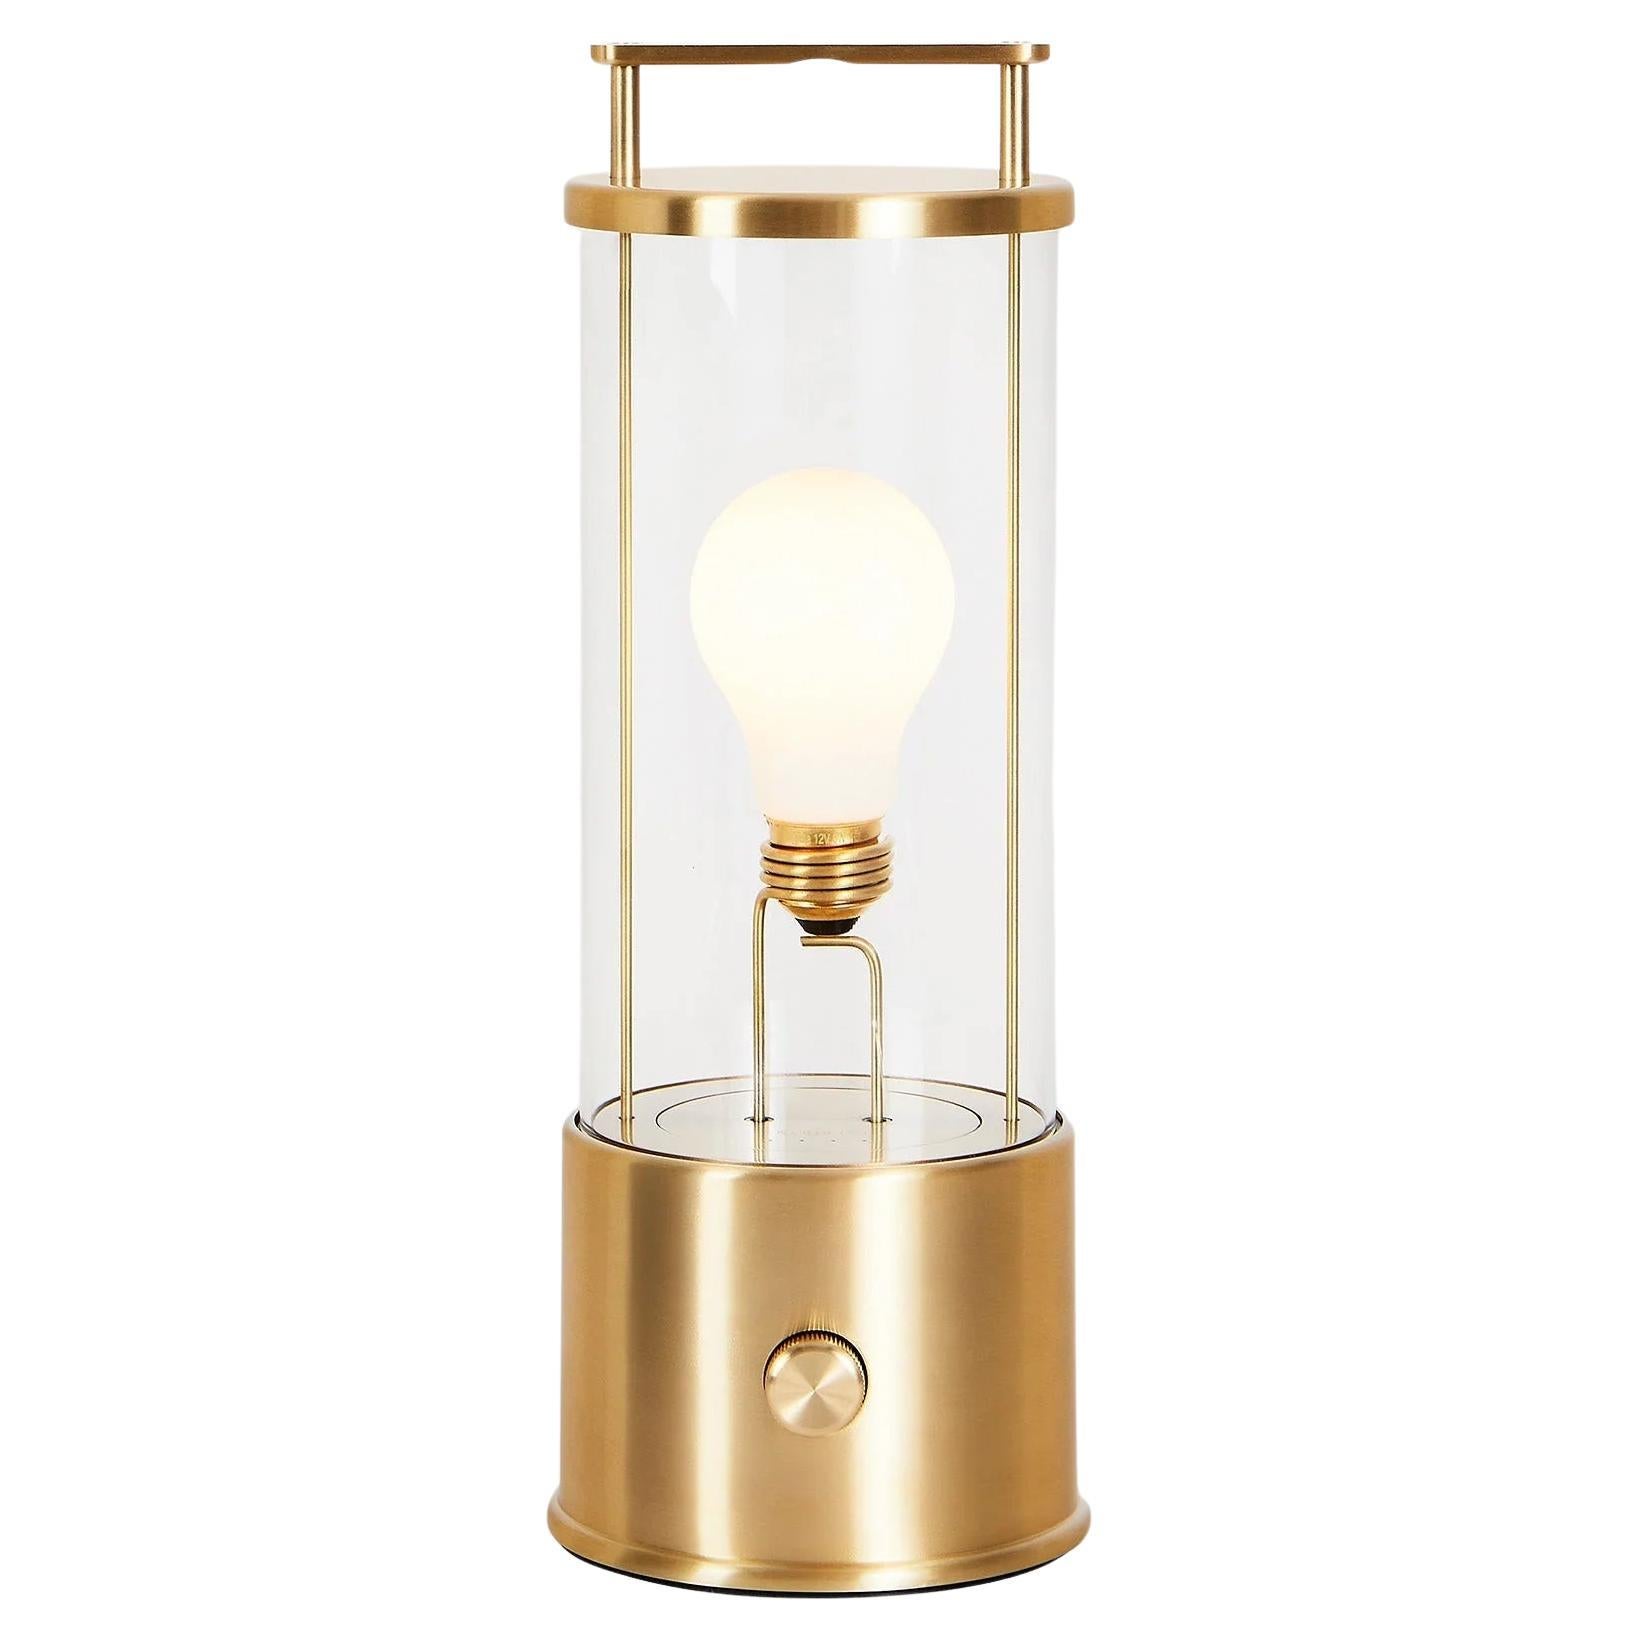 'The Muse' Portable Lamp by Farrow & Ball x Tala in Brass For Sale